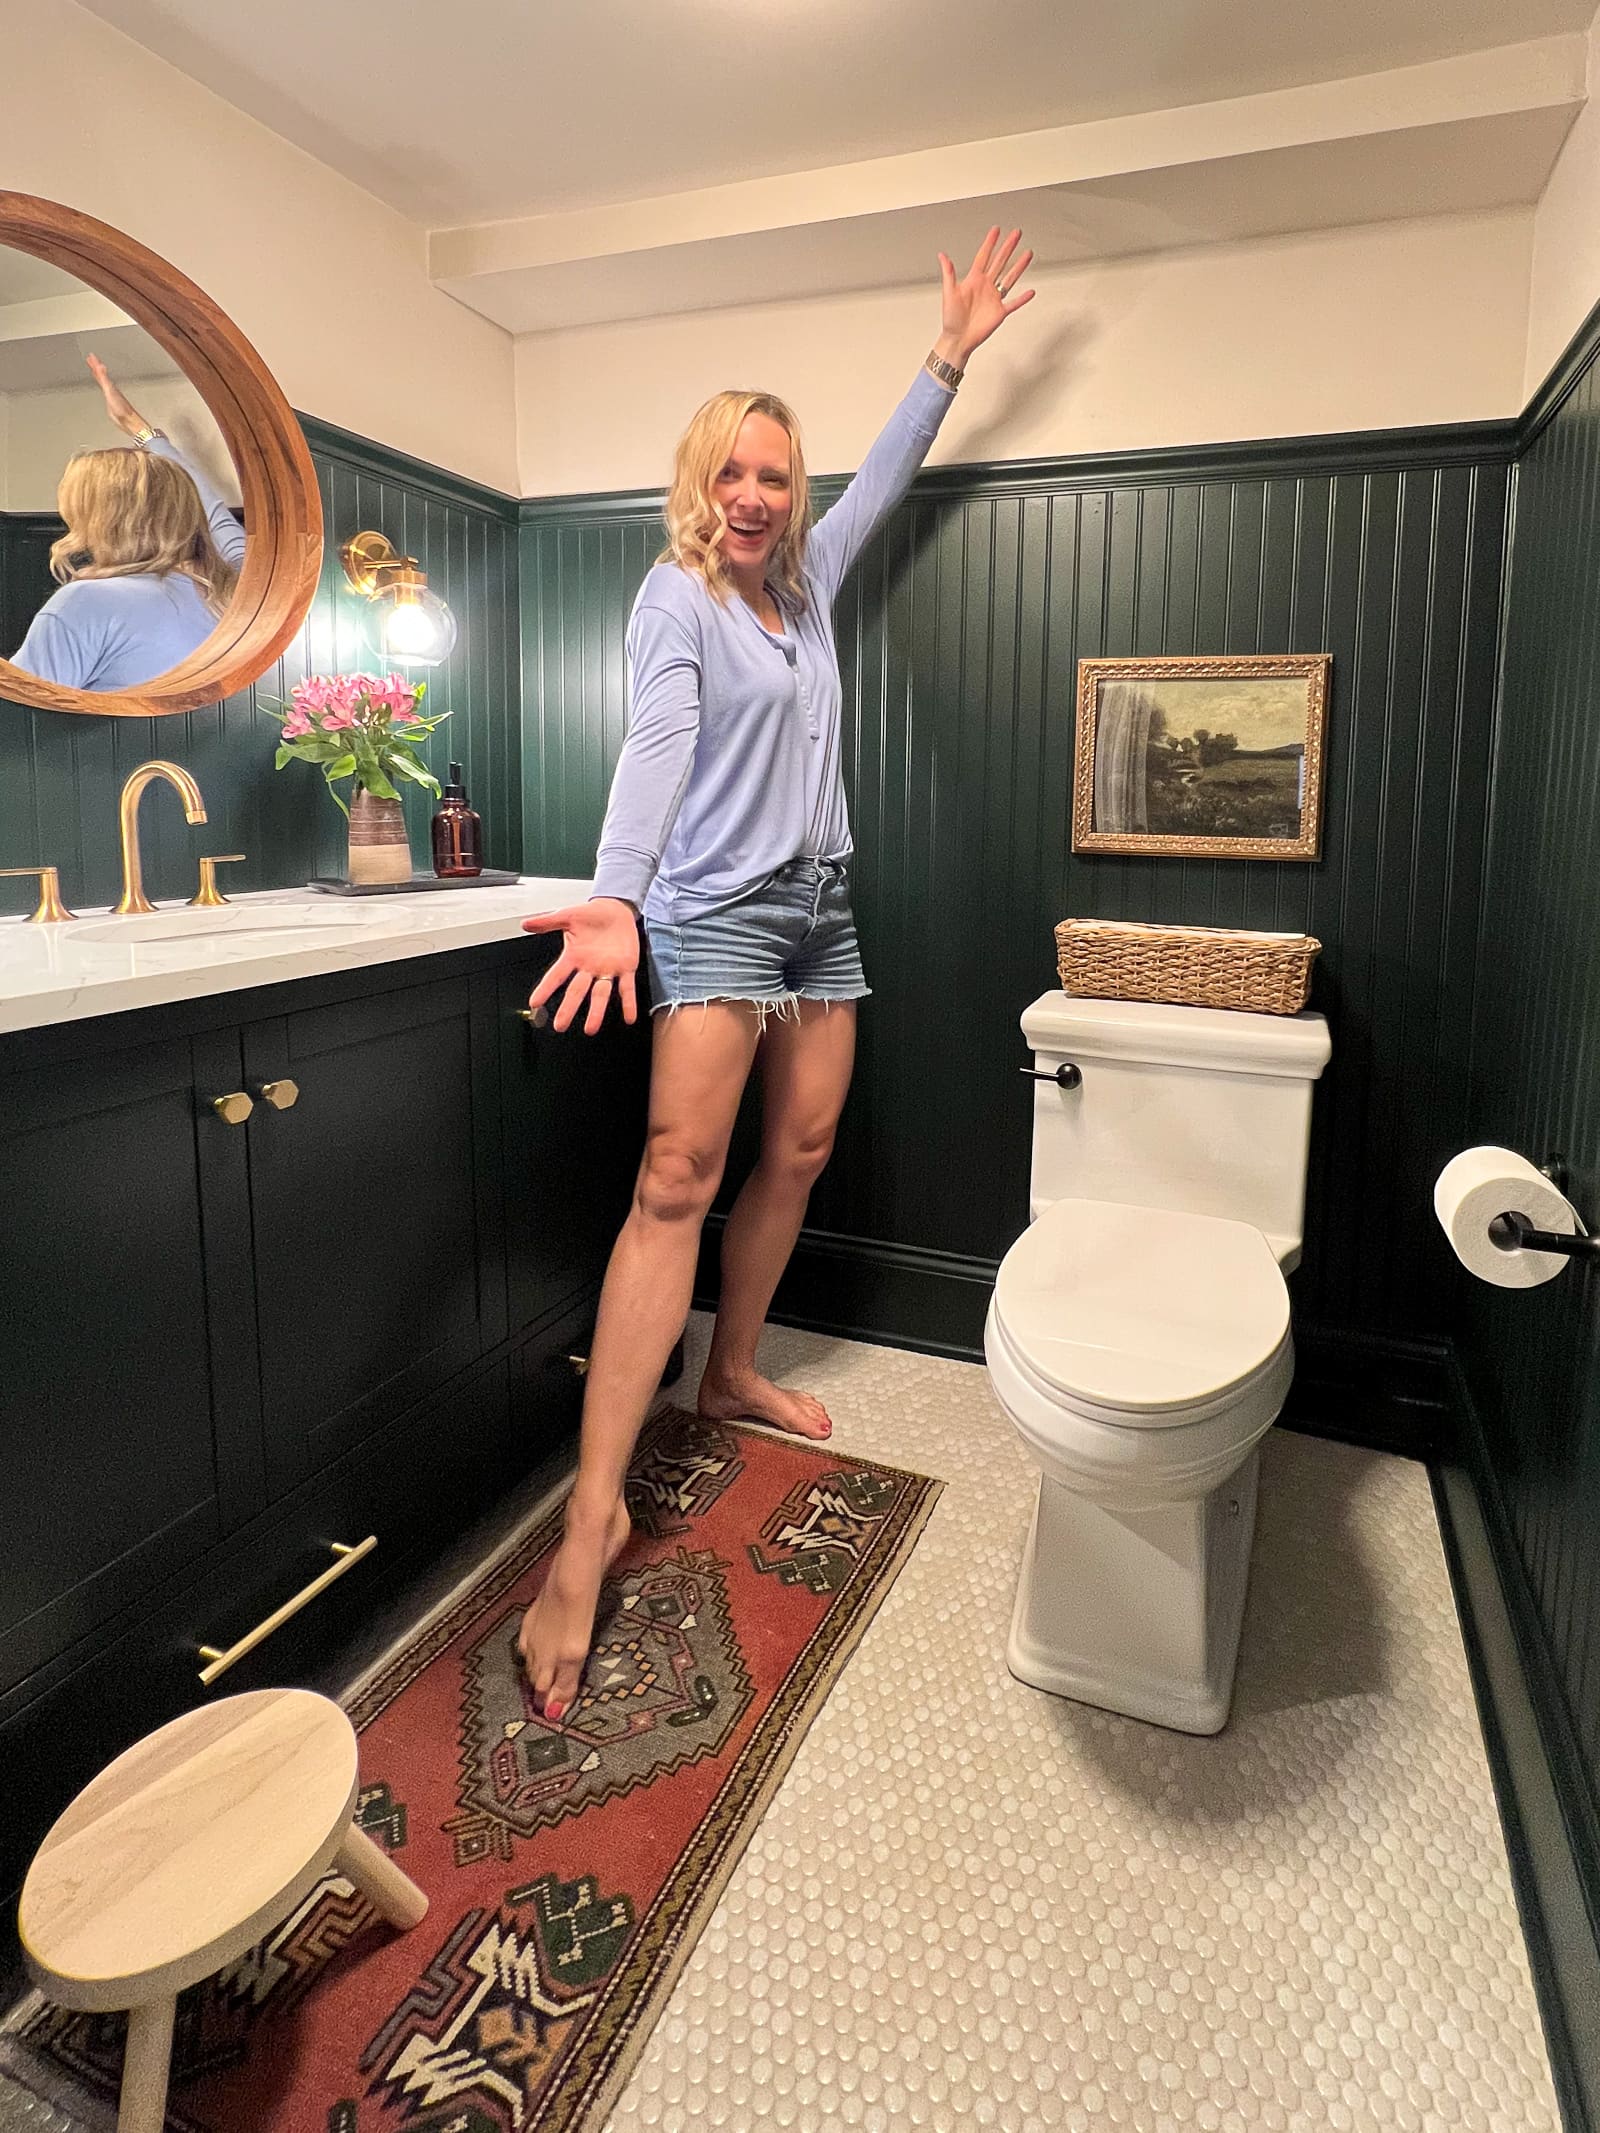 The reveal of our dark green bathroom in the basement with lots of DIY projects